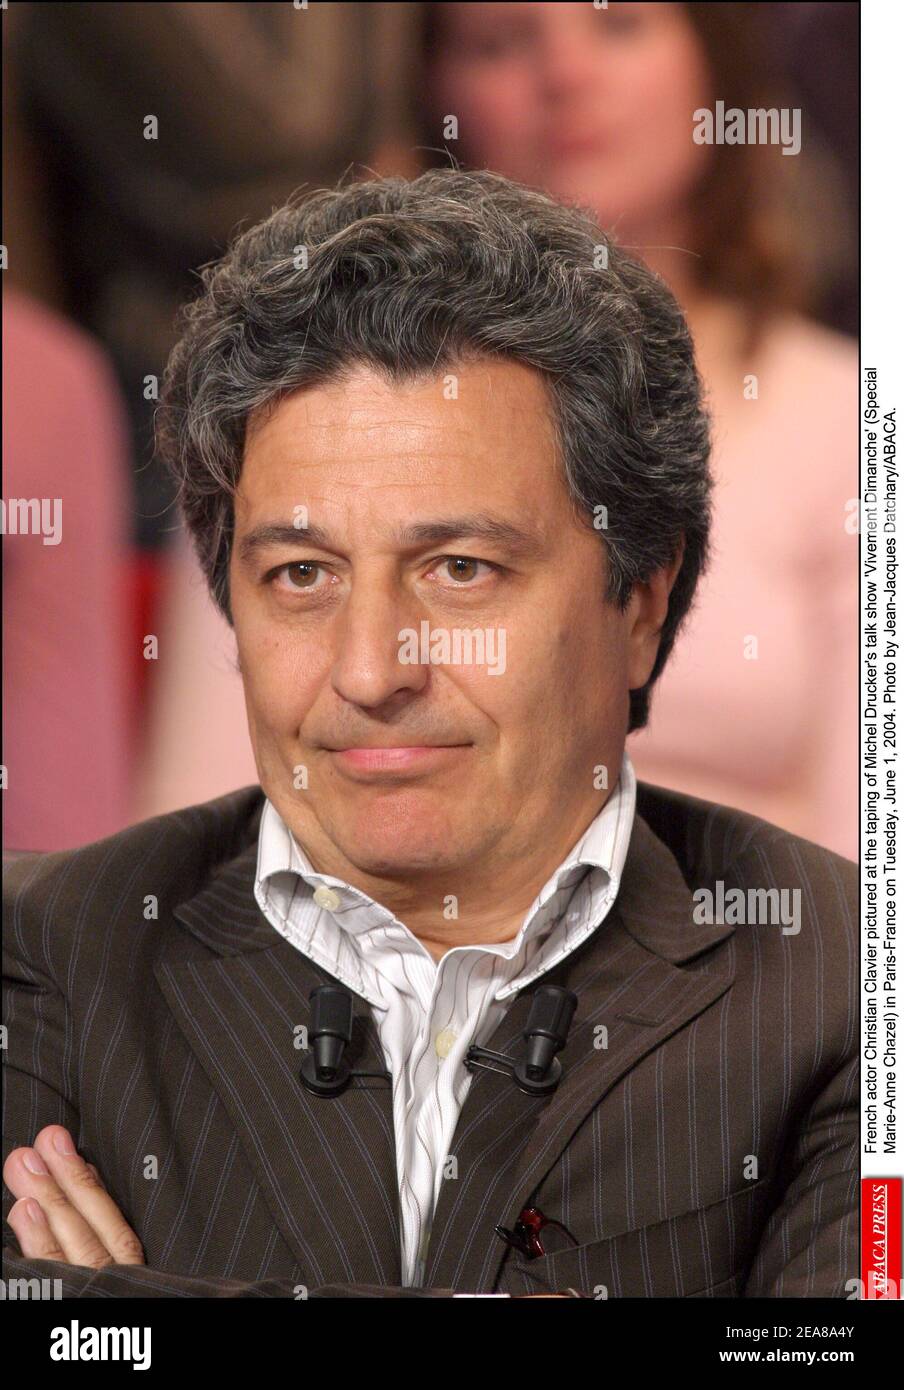 French actor Christian Clavier pictured at the taping of Michel Drucker's  talk show 'Vivement Dimanche' (Special Marie-Anne Chazel) in Paris-France  on Tuesday, June 1, 2004. Photo by Jean-Jacques Datchary/ABACA Stock Photo -